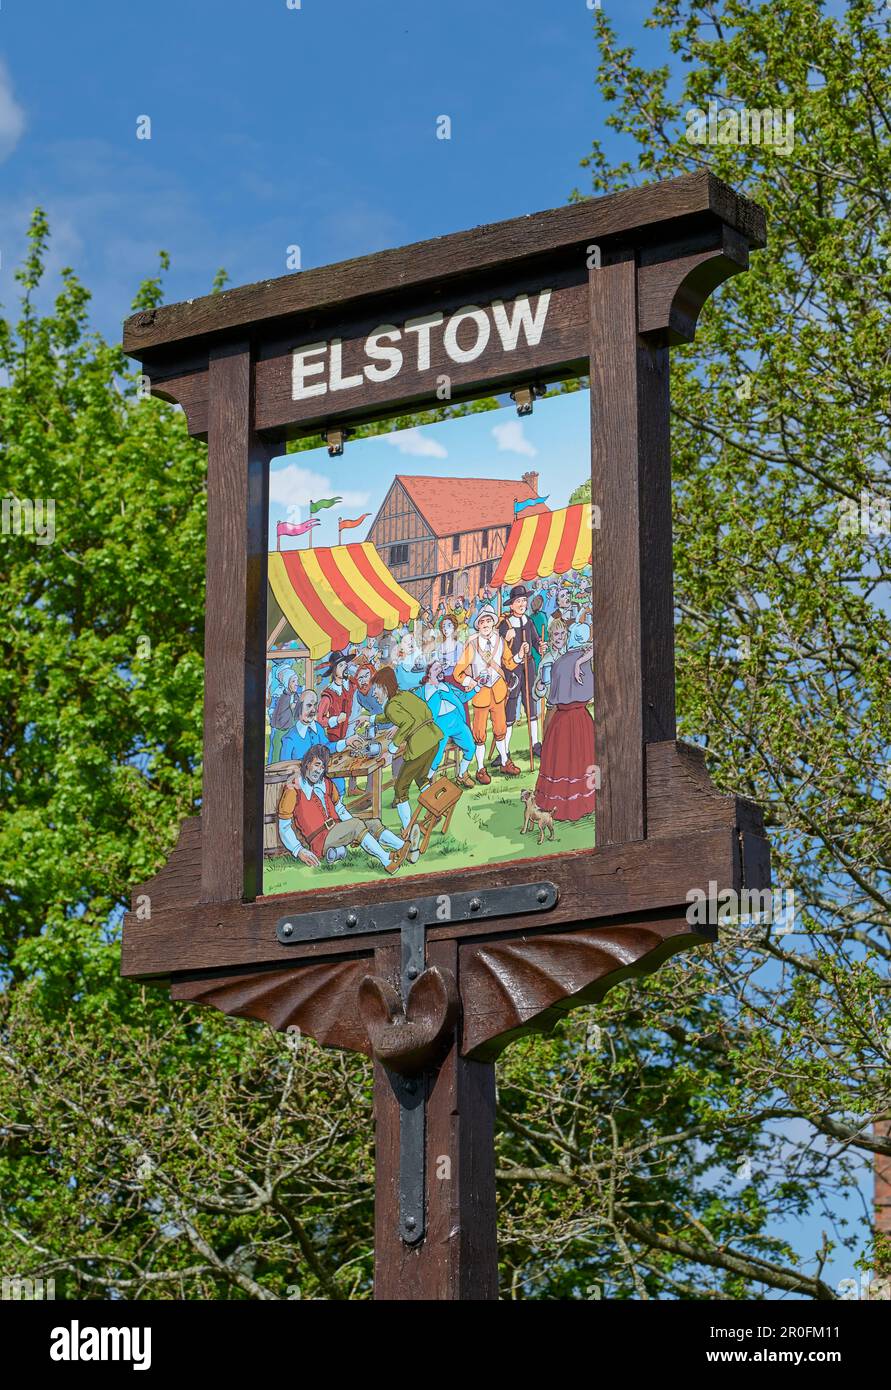 Elstow village sign, with old market scene in front of Moot Hall, on The Green, Elstow Stock Photo